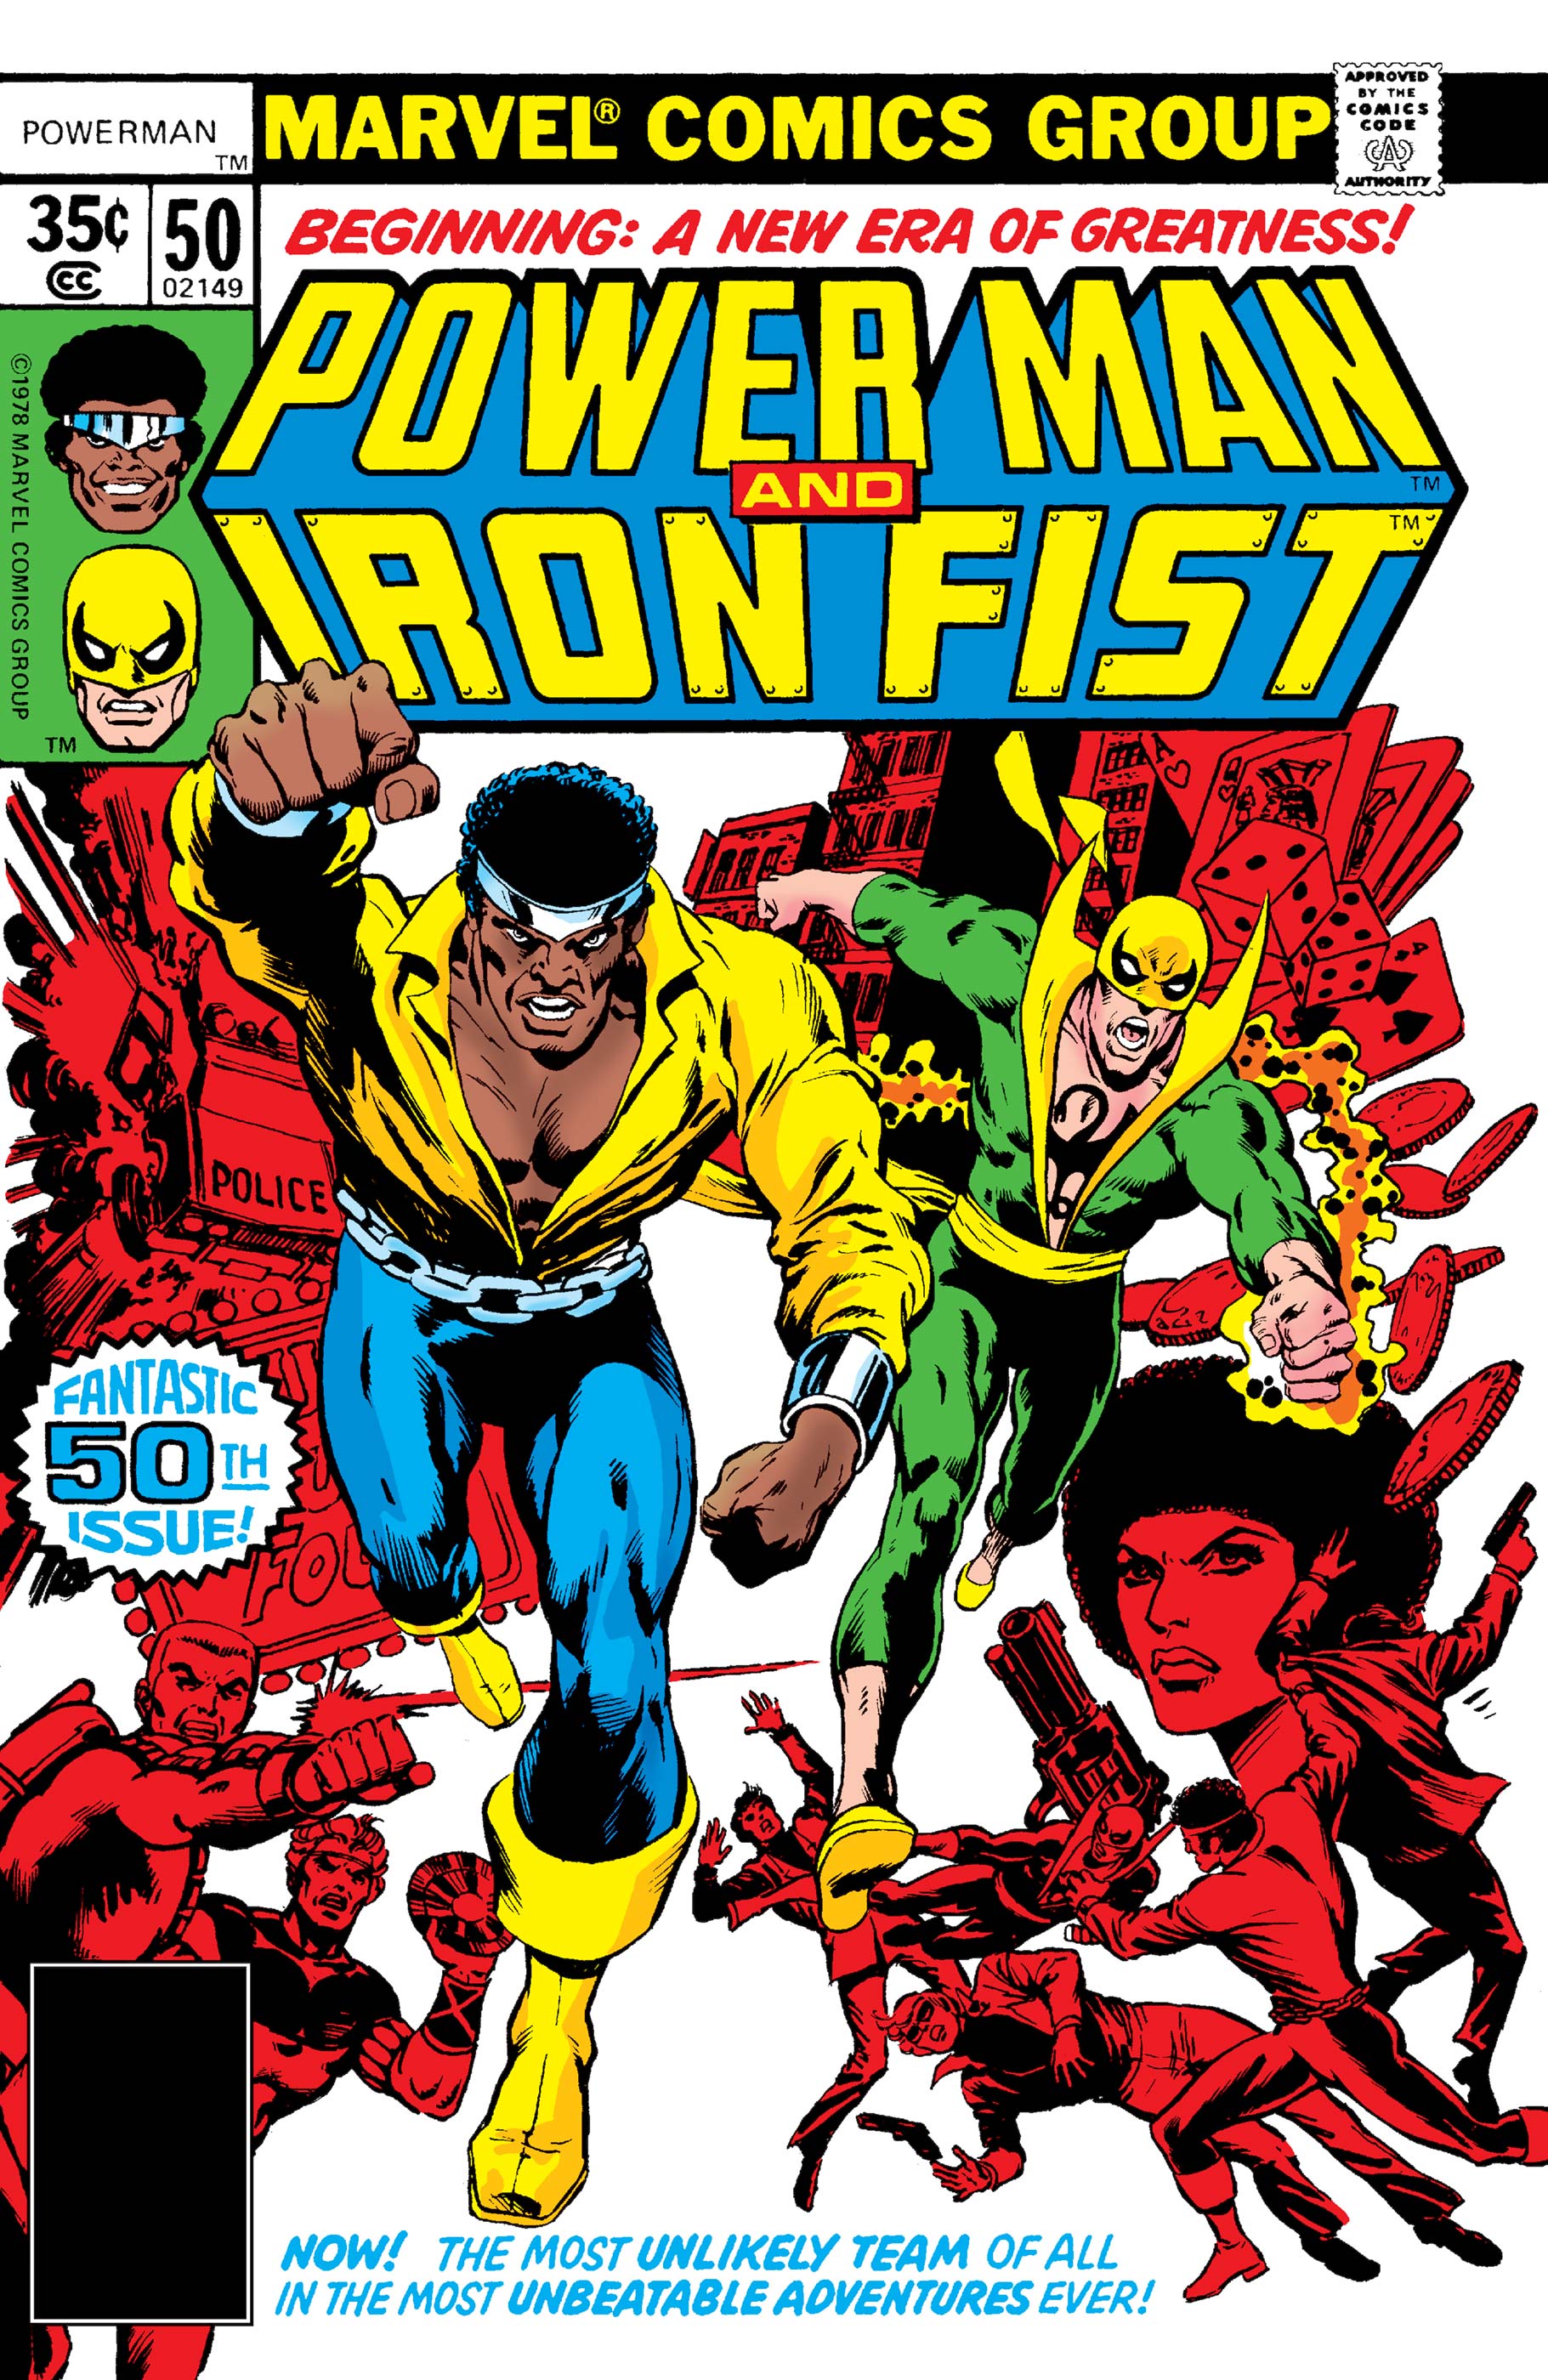 Power Man and Iron Fist (1978) #50